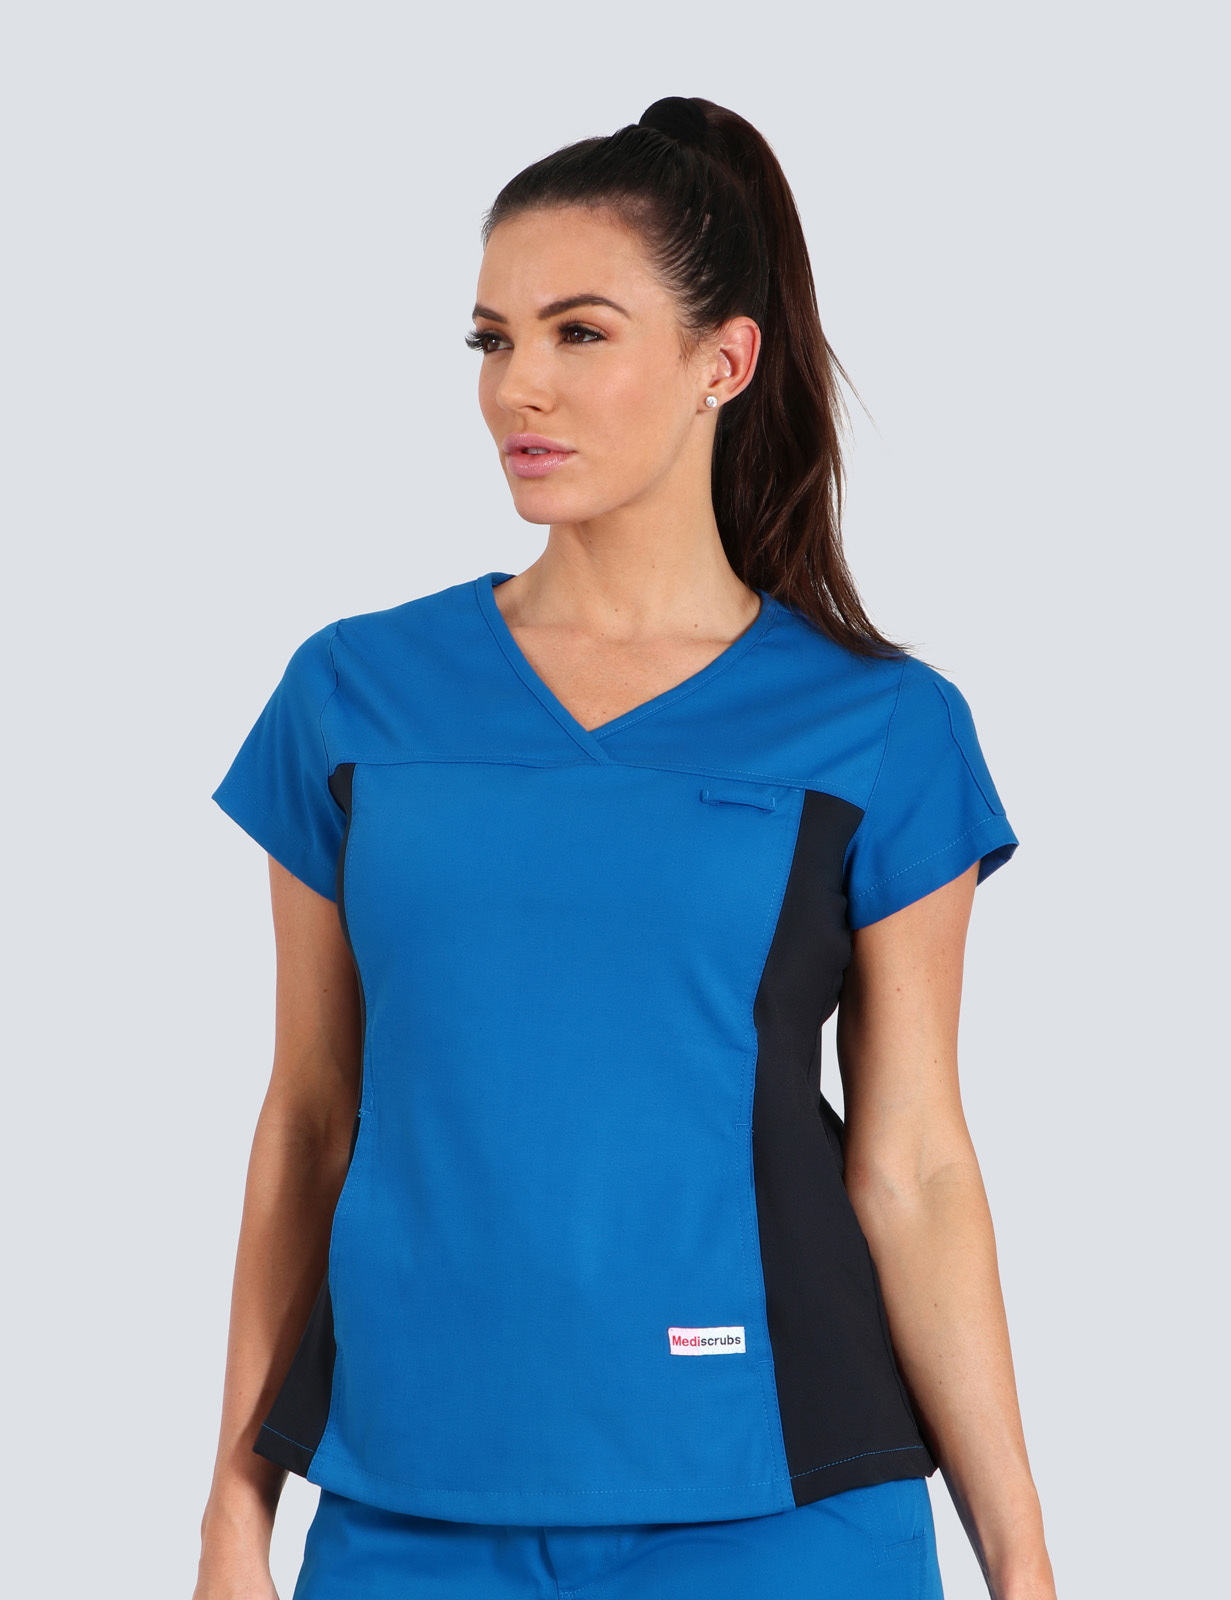 St. Vincent's Dental Centre (Women's Fit Spandex Scrub Top in Steel Grey incl Logos)